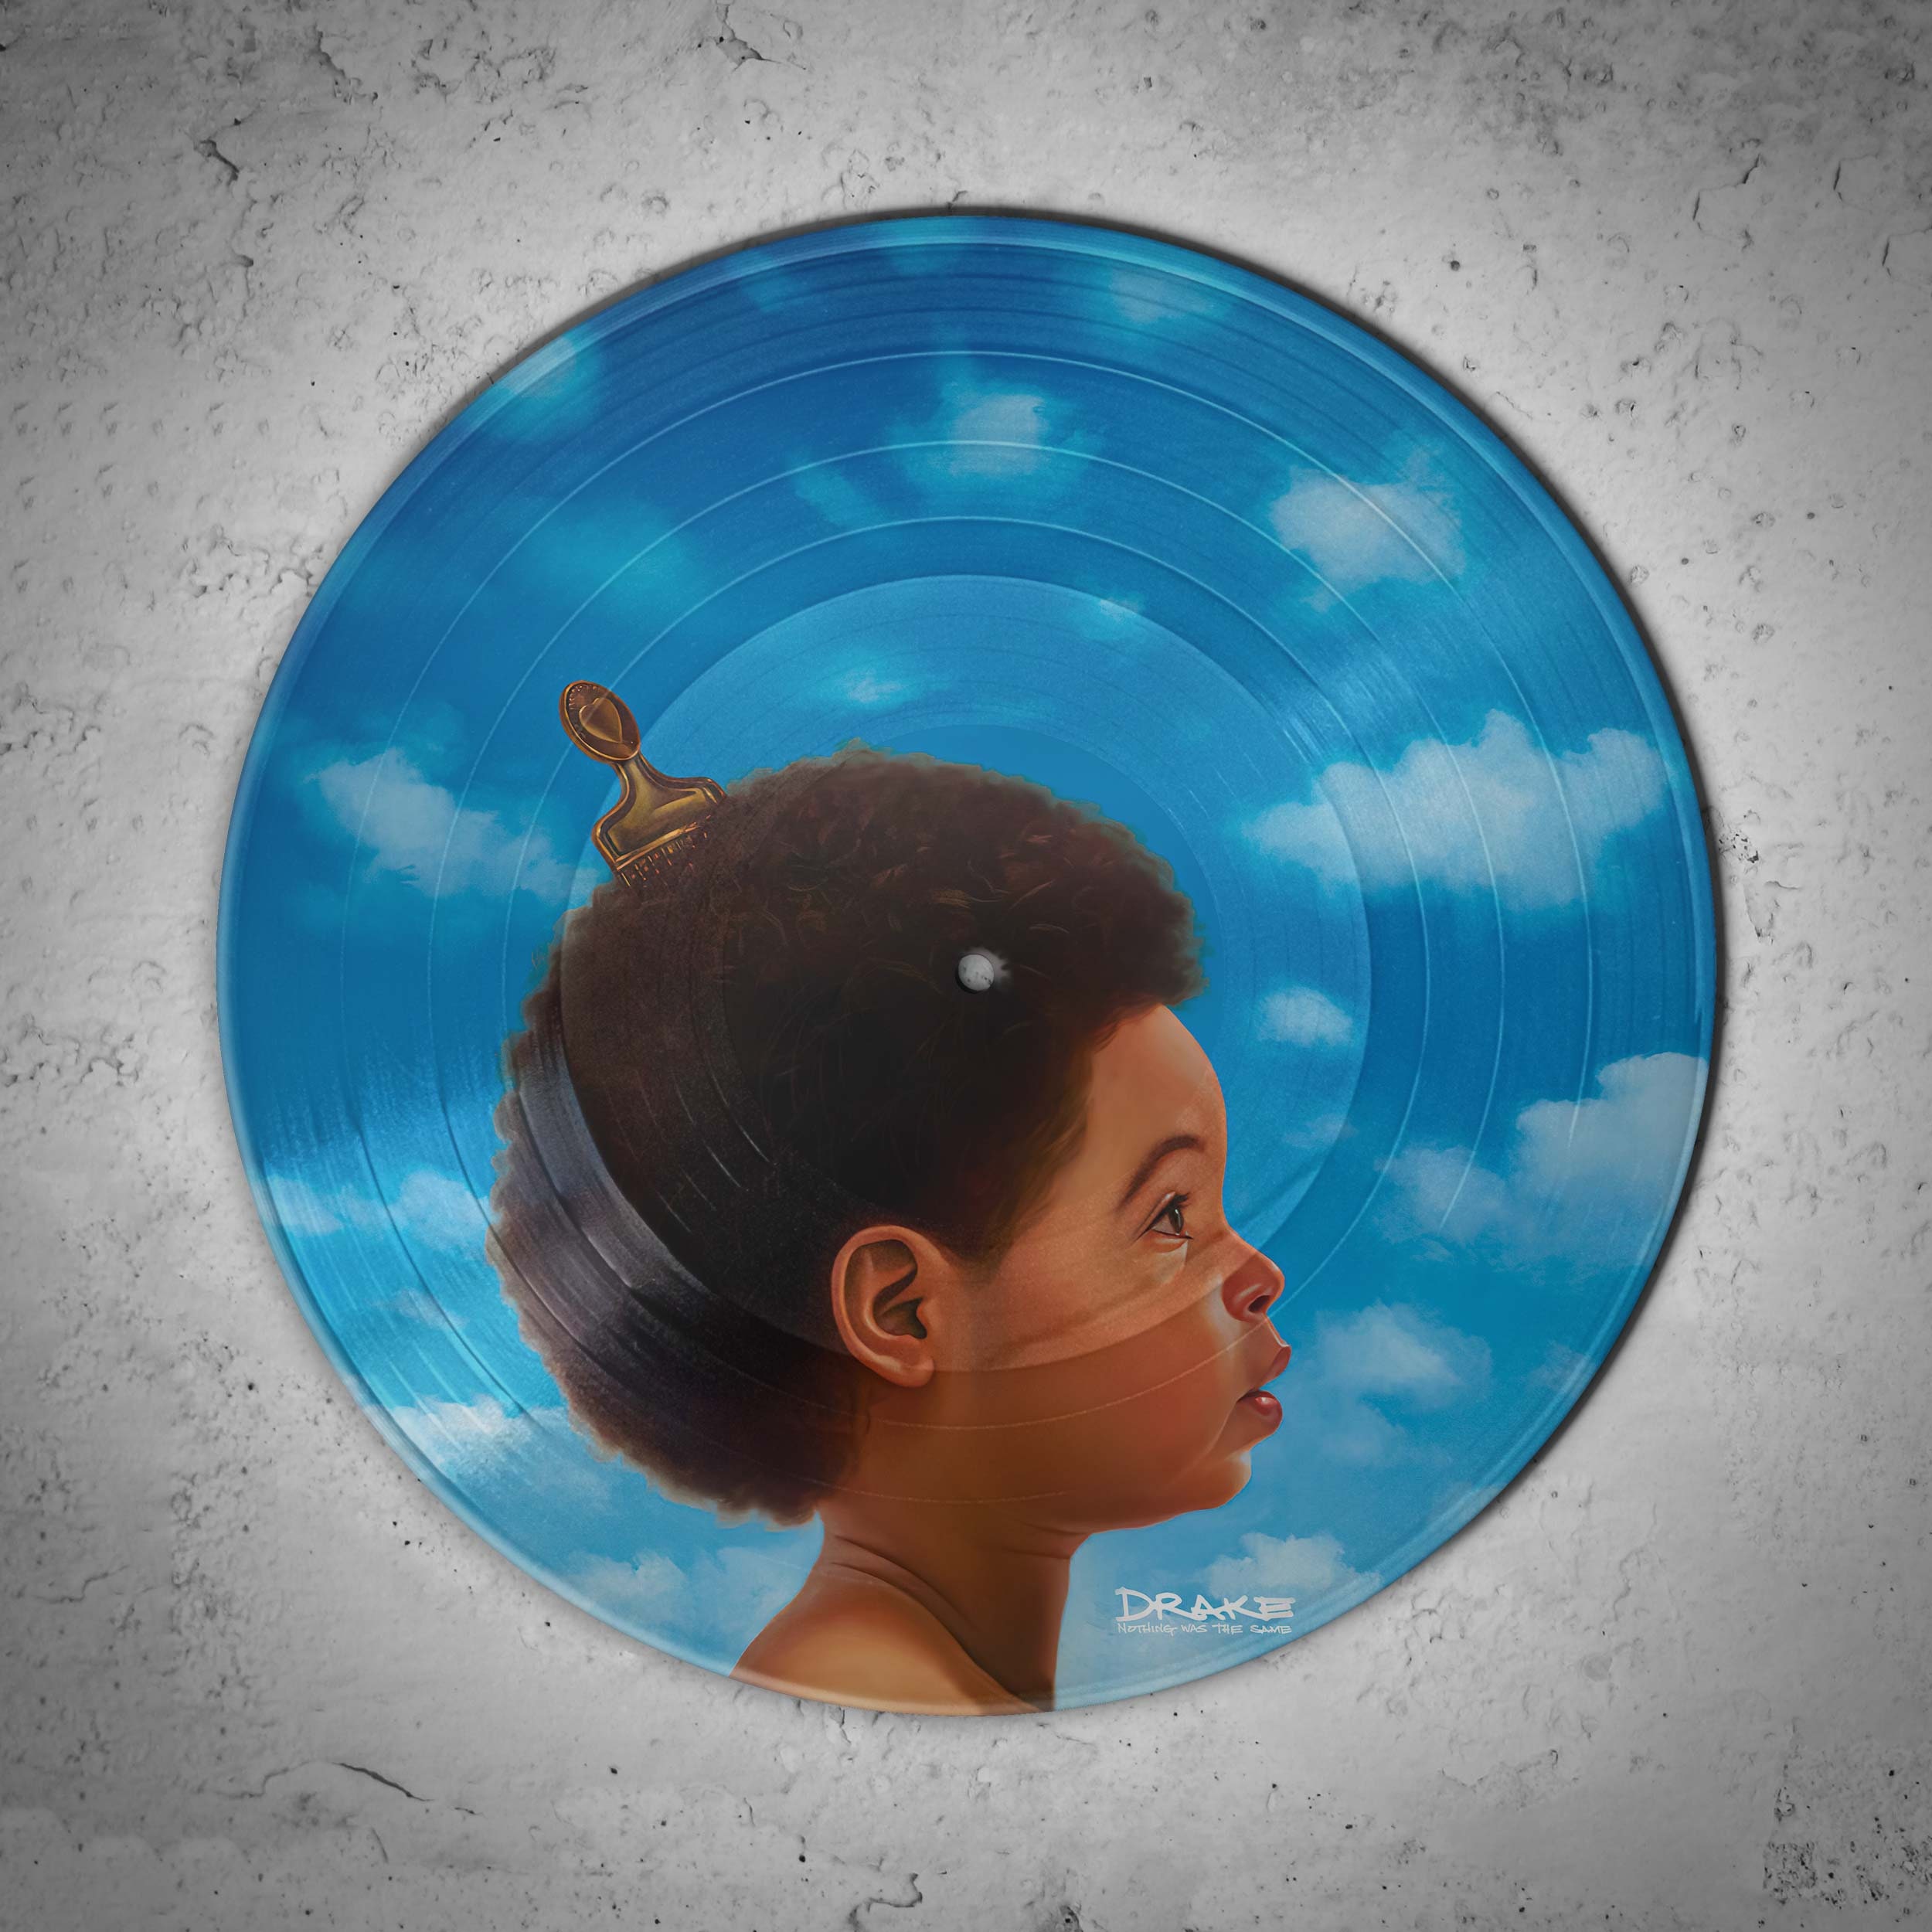 Drake Nothing Was the Same Poster Printed on the Retro Vinyl Record Unique  Home Decor Wonderful Gift for Your Friend Art Design -  Israel